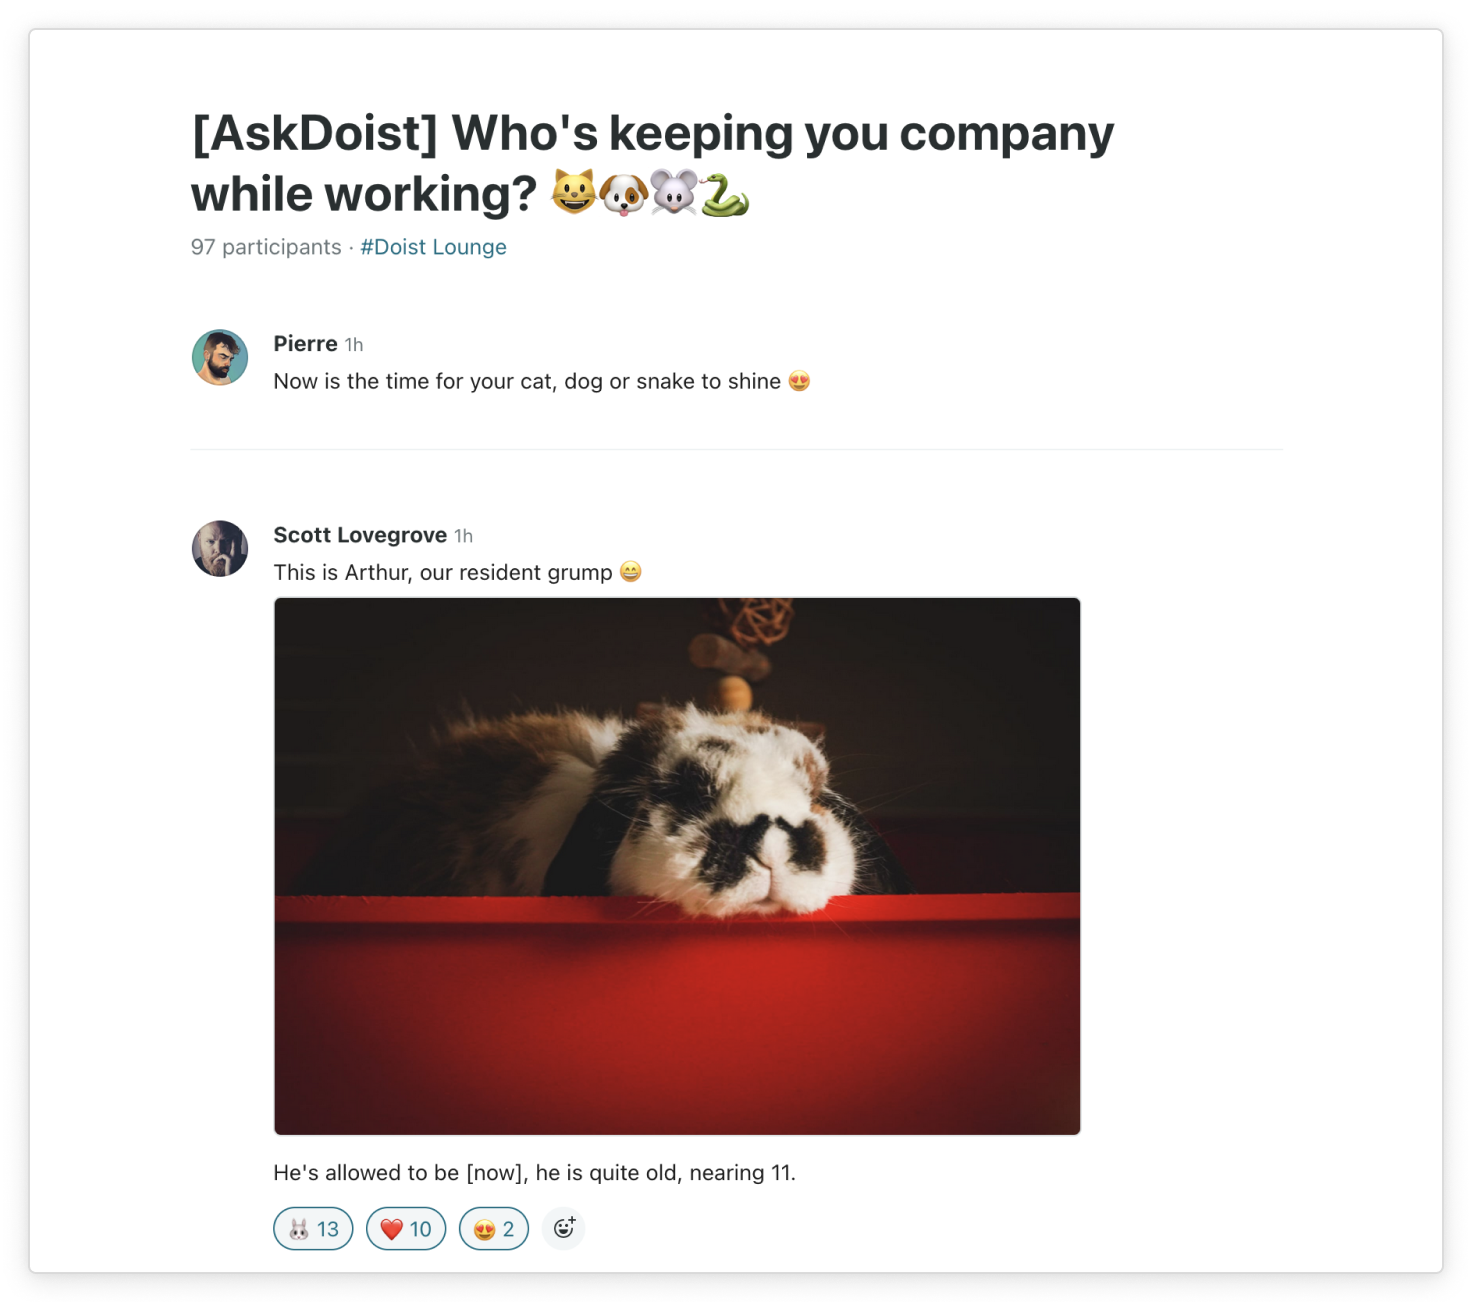 A screenshot for a Twist thread titled: "Ask Doist, Who's keeping you company while you working?" is shown. Doister Scott shares a picture of his rabbit with the caption "This is Arthur, our resident grump." End description.